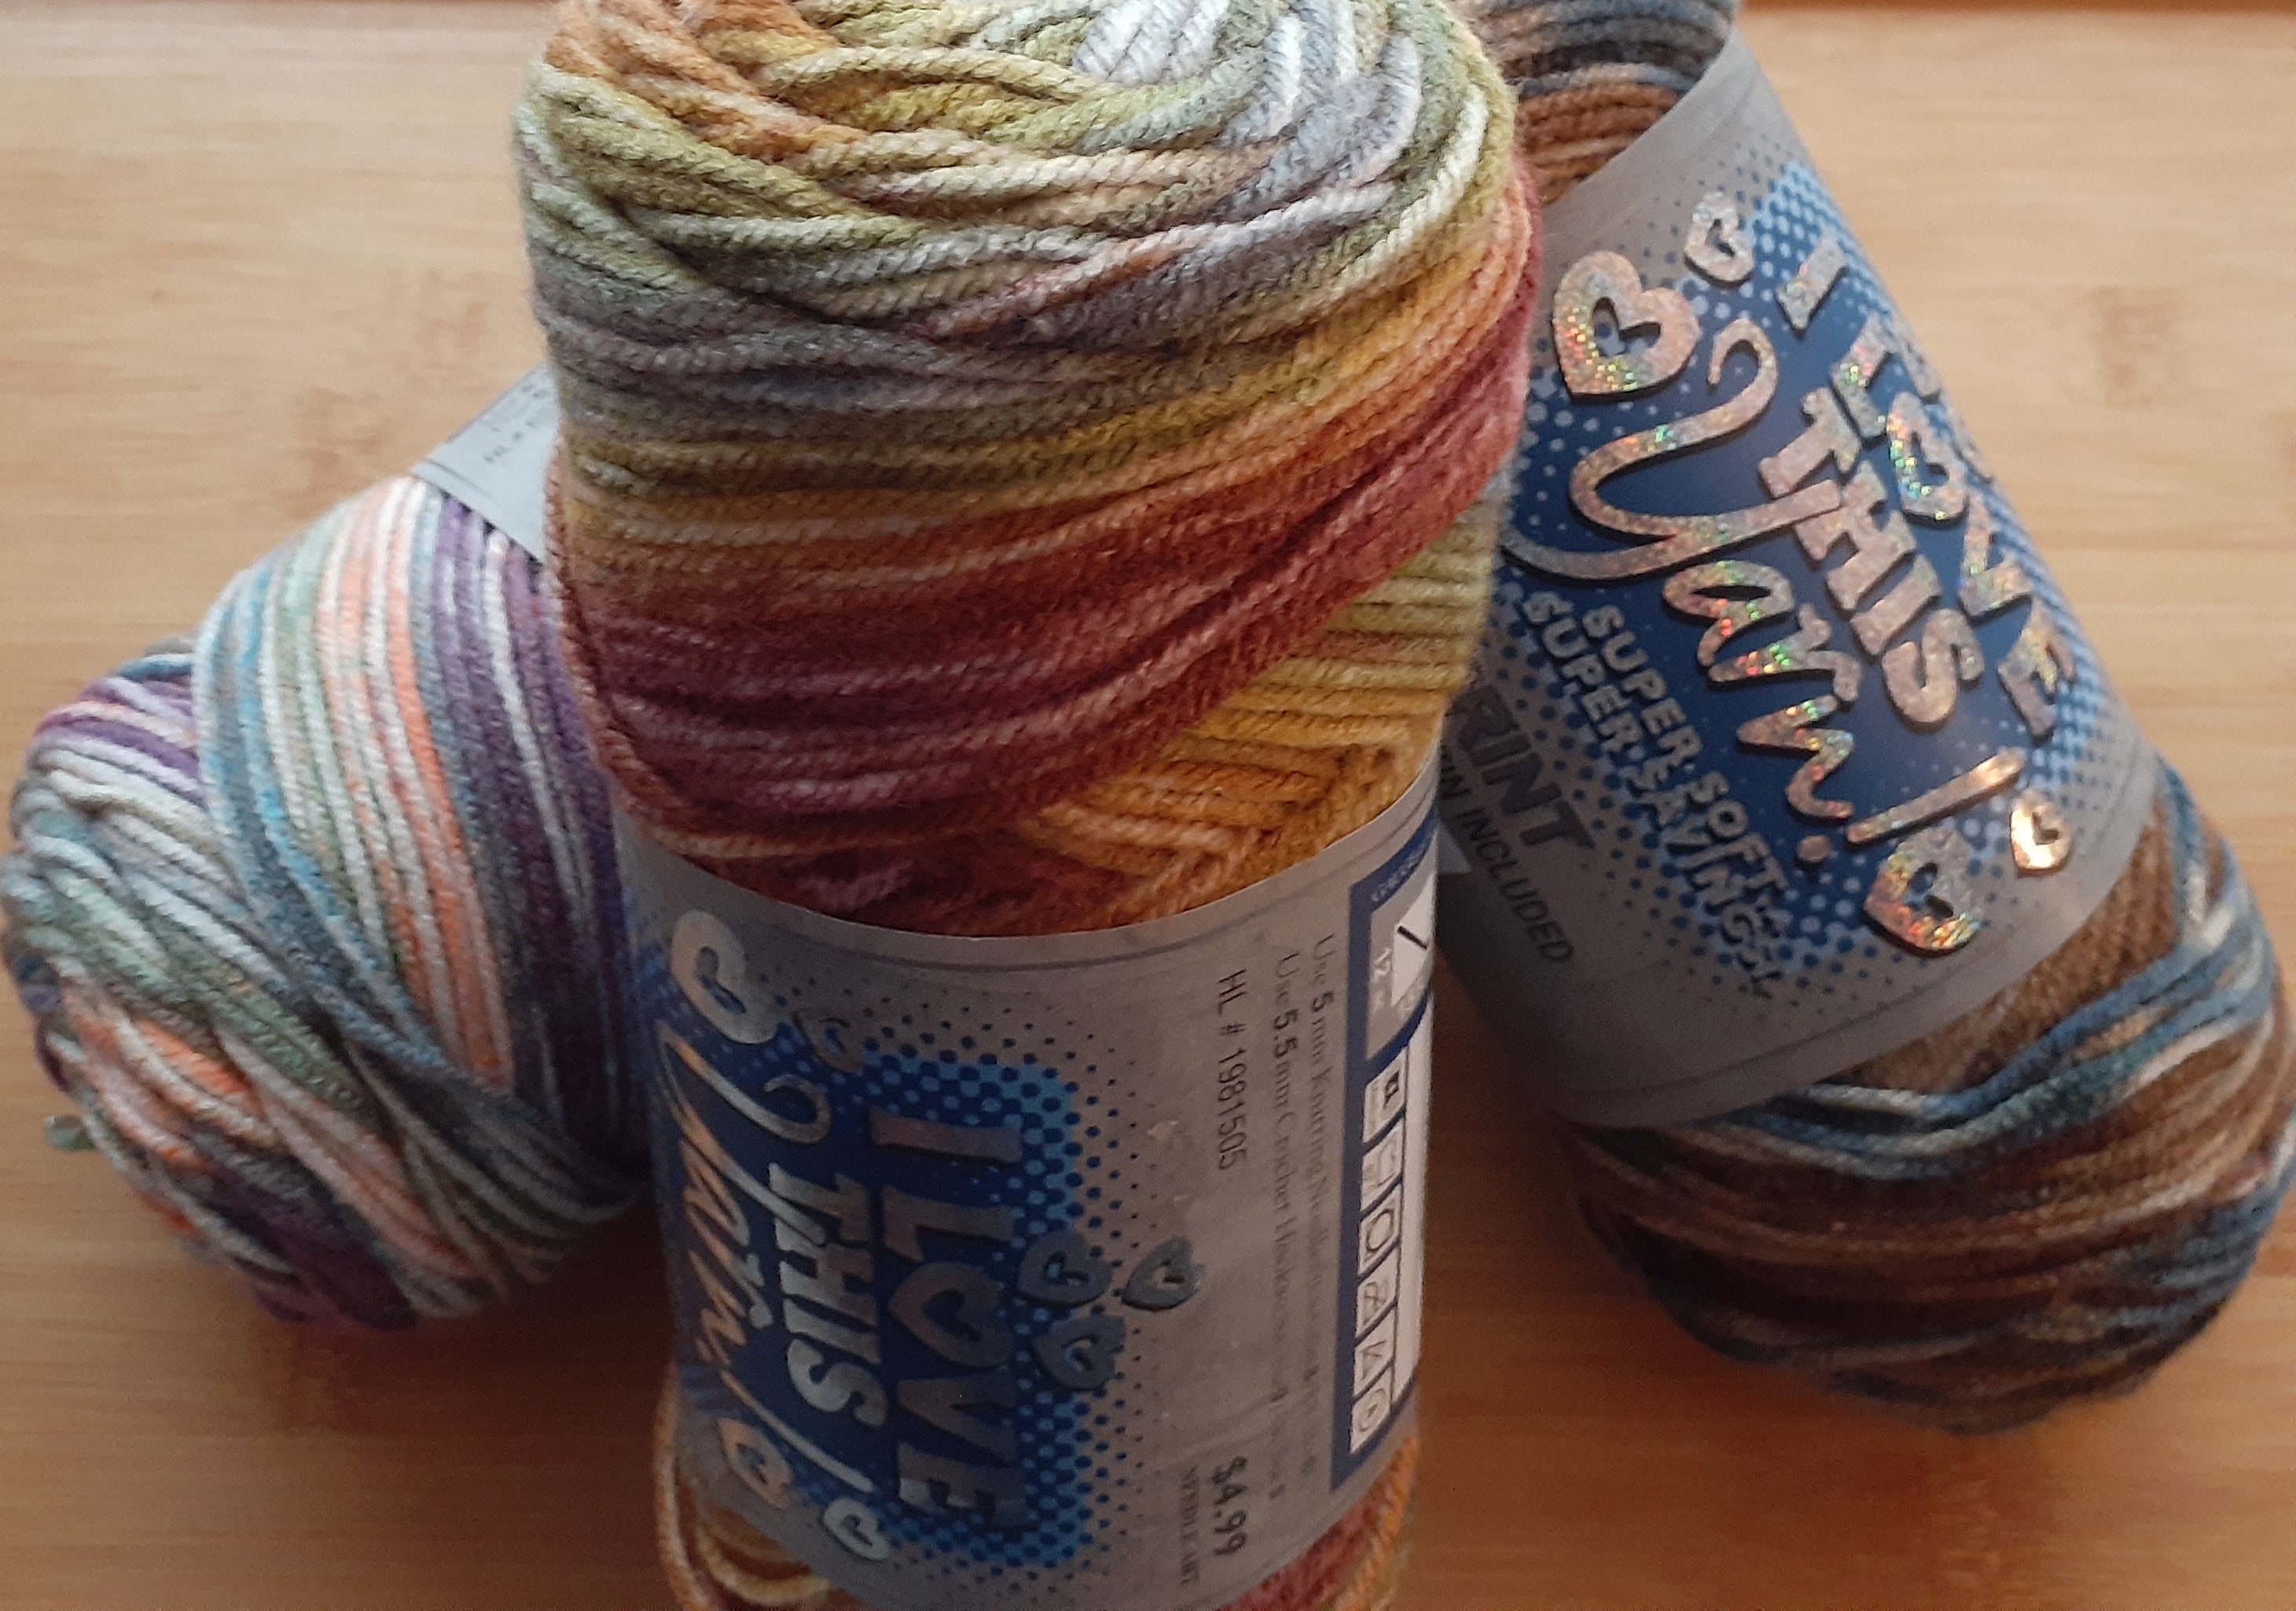 I LOVE THIS Cotton Brand Yarn Various Solid Colors! Price Per Skein $7.99 -  PicClick